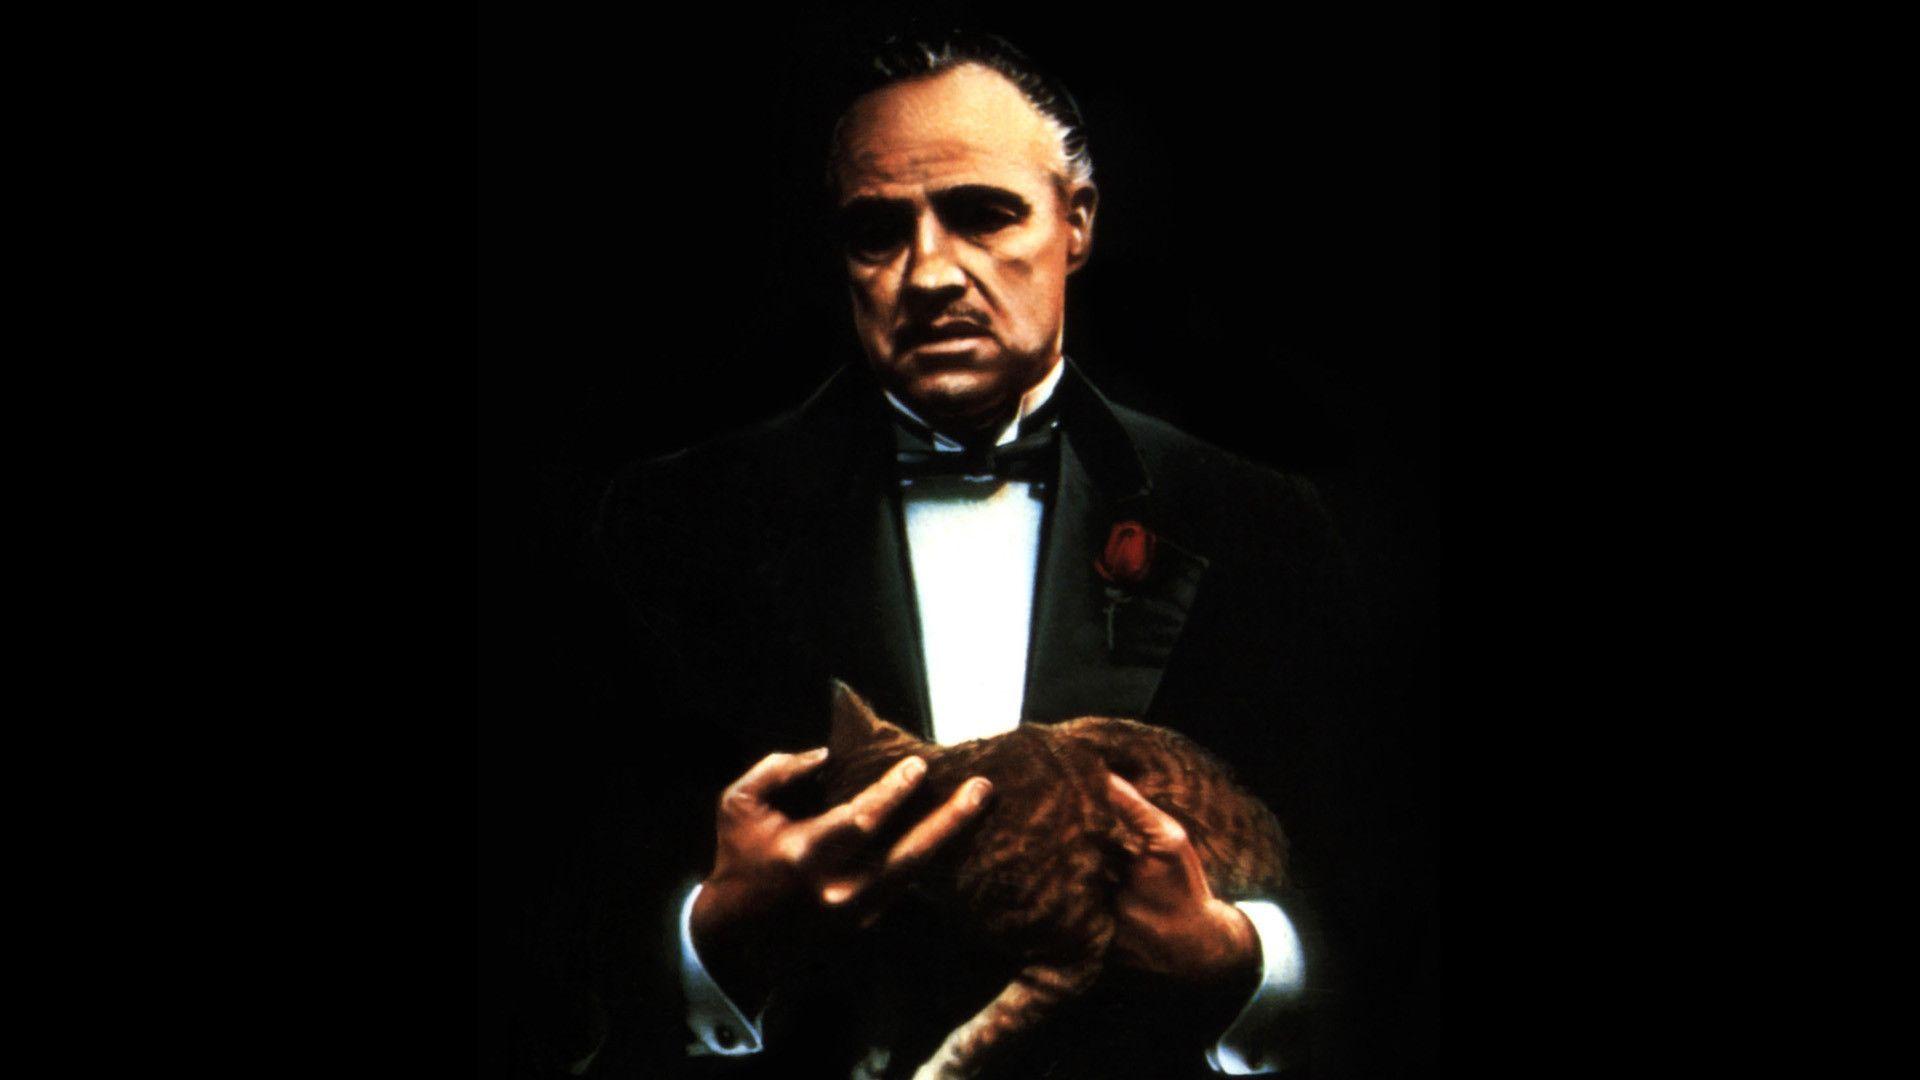 The Godfather Wallpaper, Classic Movie